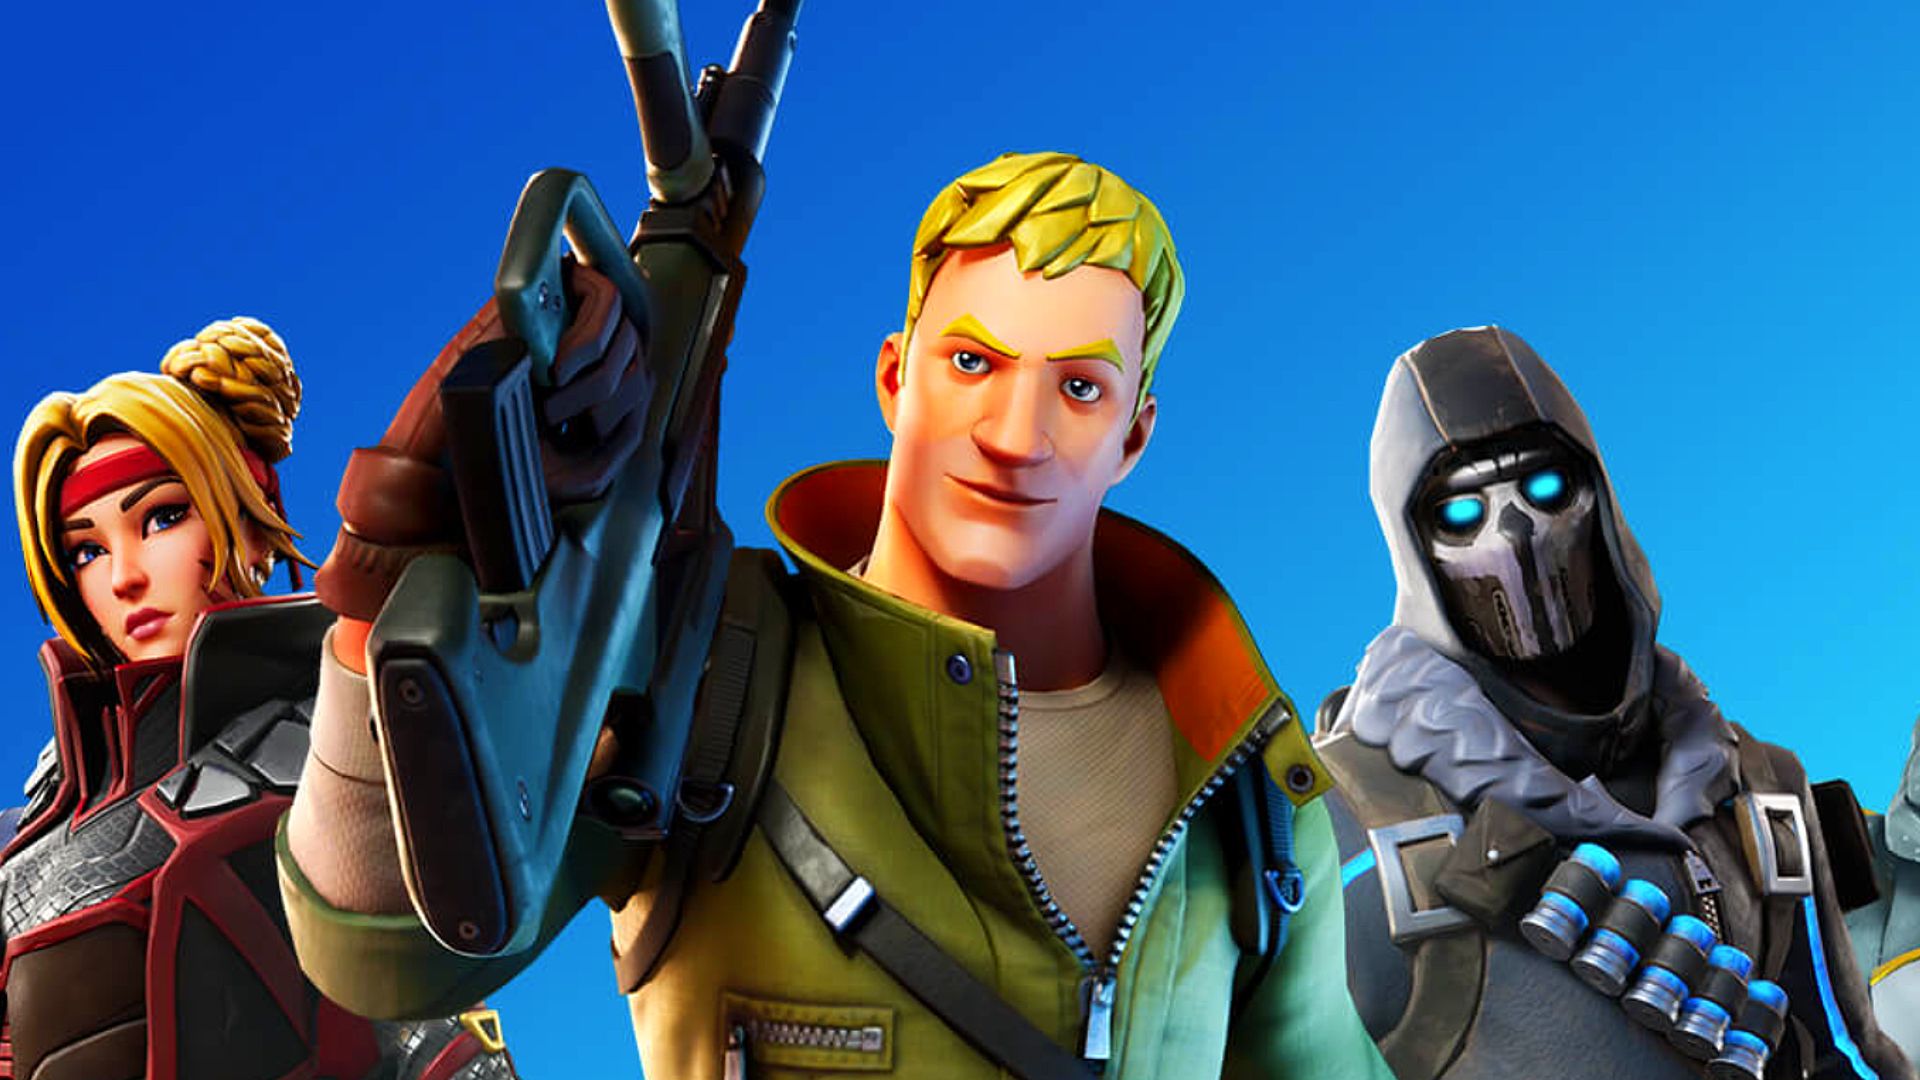 Fortnite Chapter 2 Season 2 release date, map changes, and new season